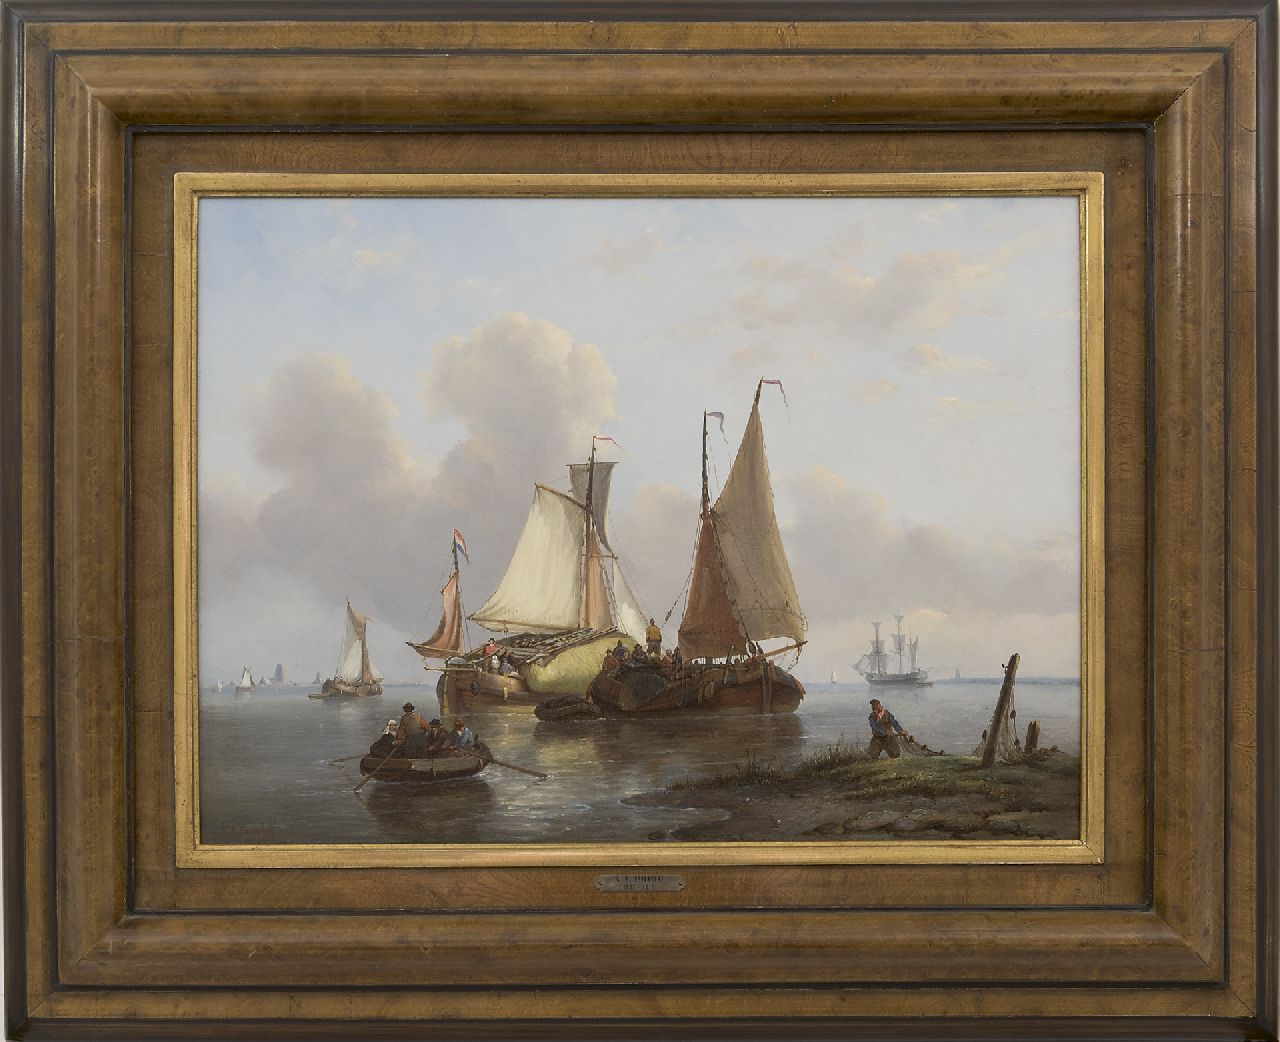 Opdenhoff G.W.  | Witzel 'George Willem' Opdenhoff, Cargo vessels sailing in a calm, oil on panel 38.8 x 53.1 cm, signed l.l.